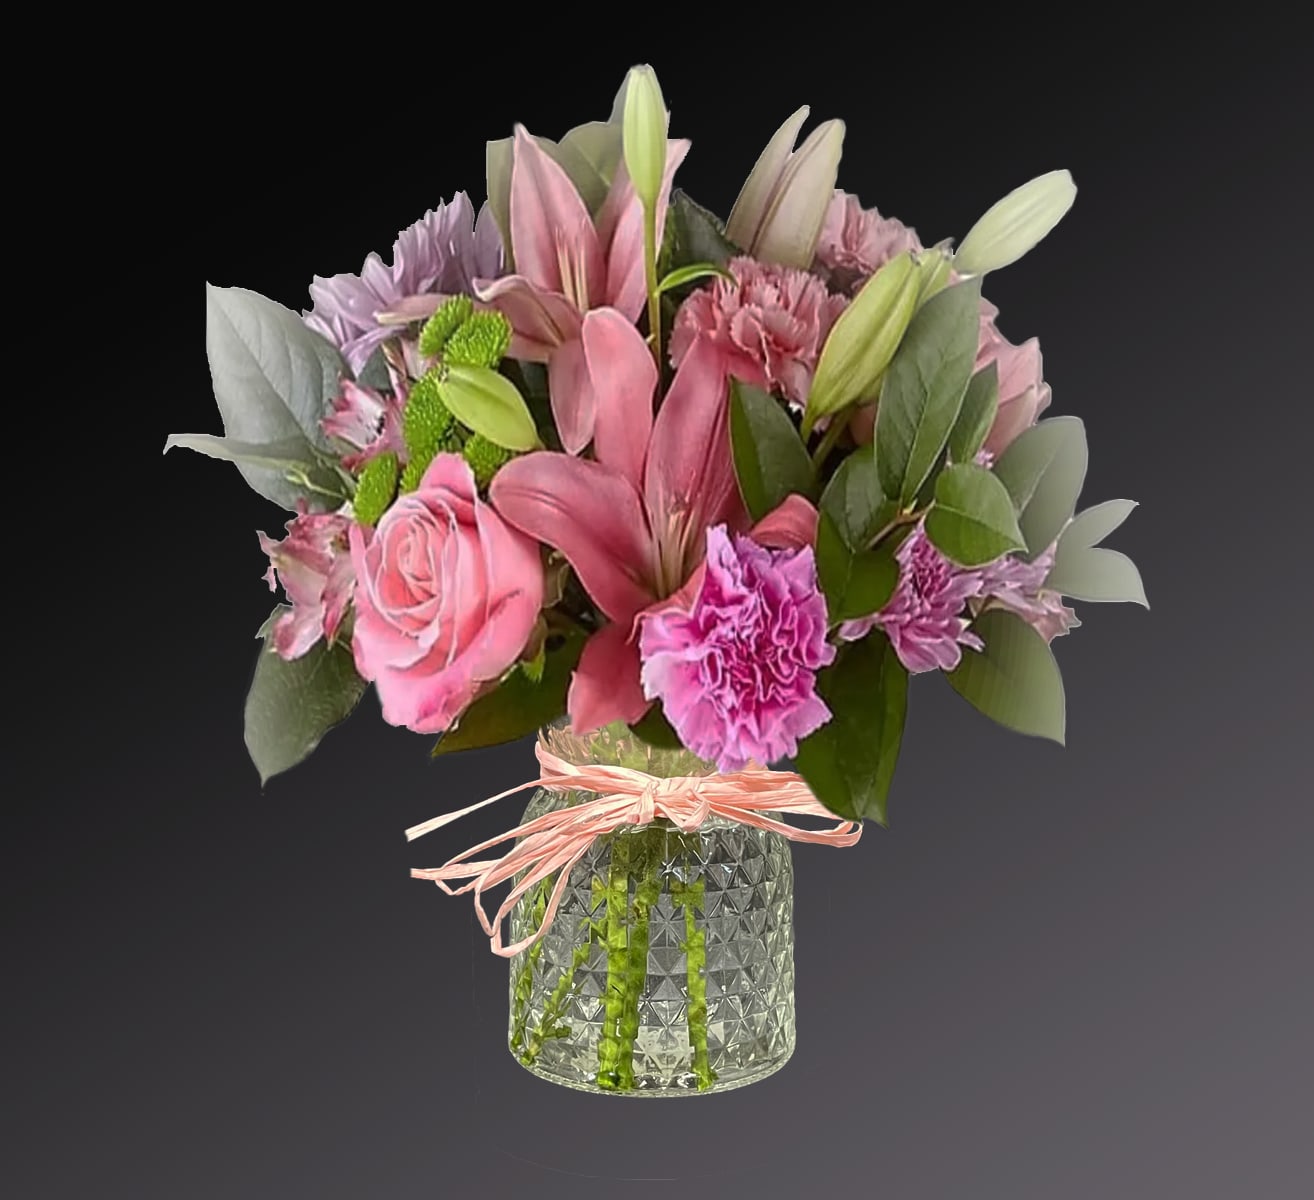 Simple Gorgeous - pink and lavender blooms are a sweet and innocent way to show your affection.